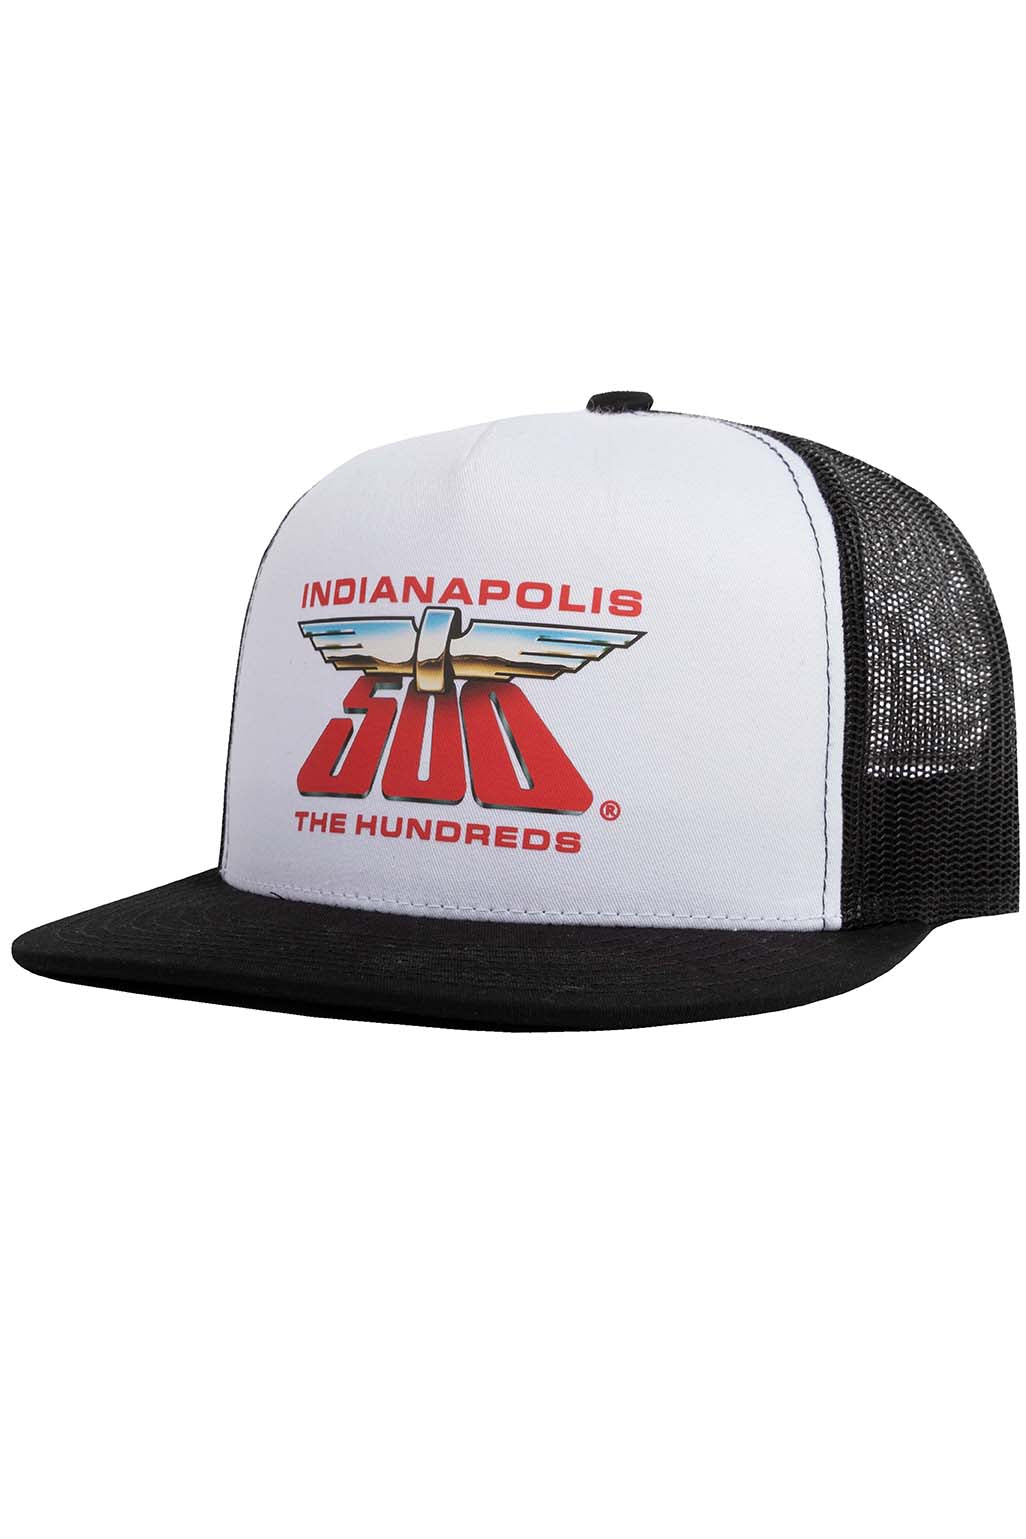 Image of Indy 500 Trucker Hat